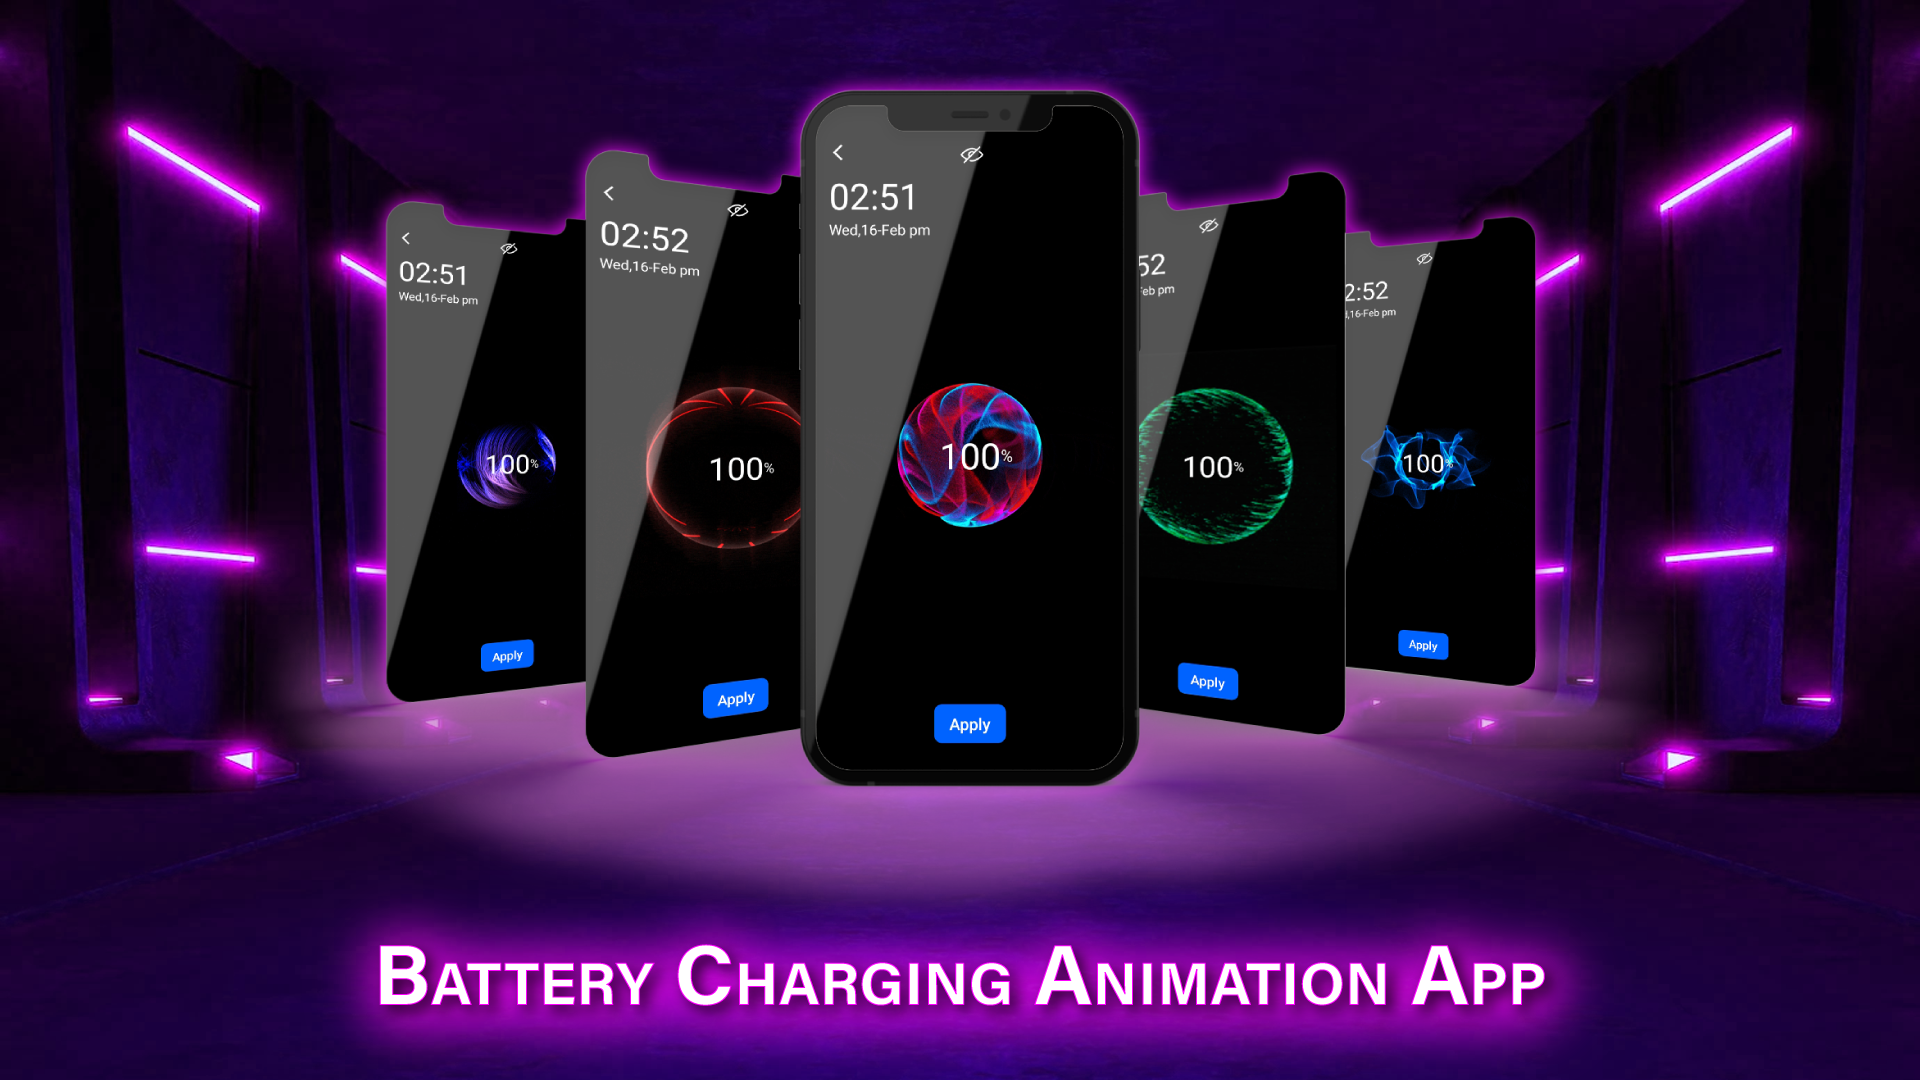 Battery Charging Animation - Free HD Video Clips & Stock Video Footage at  Videezy!